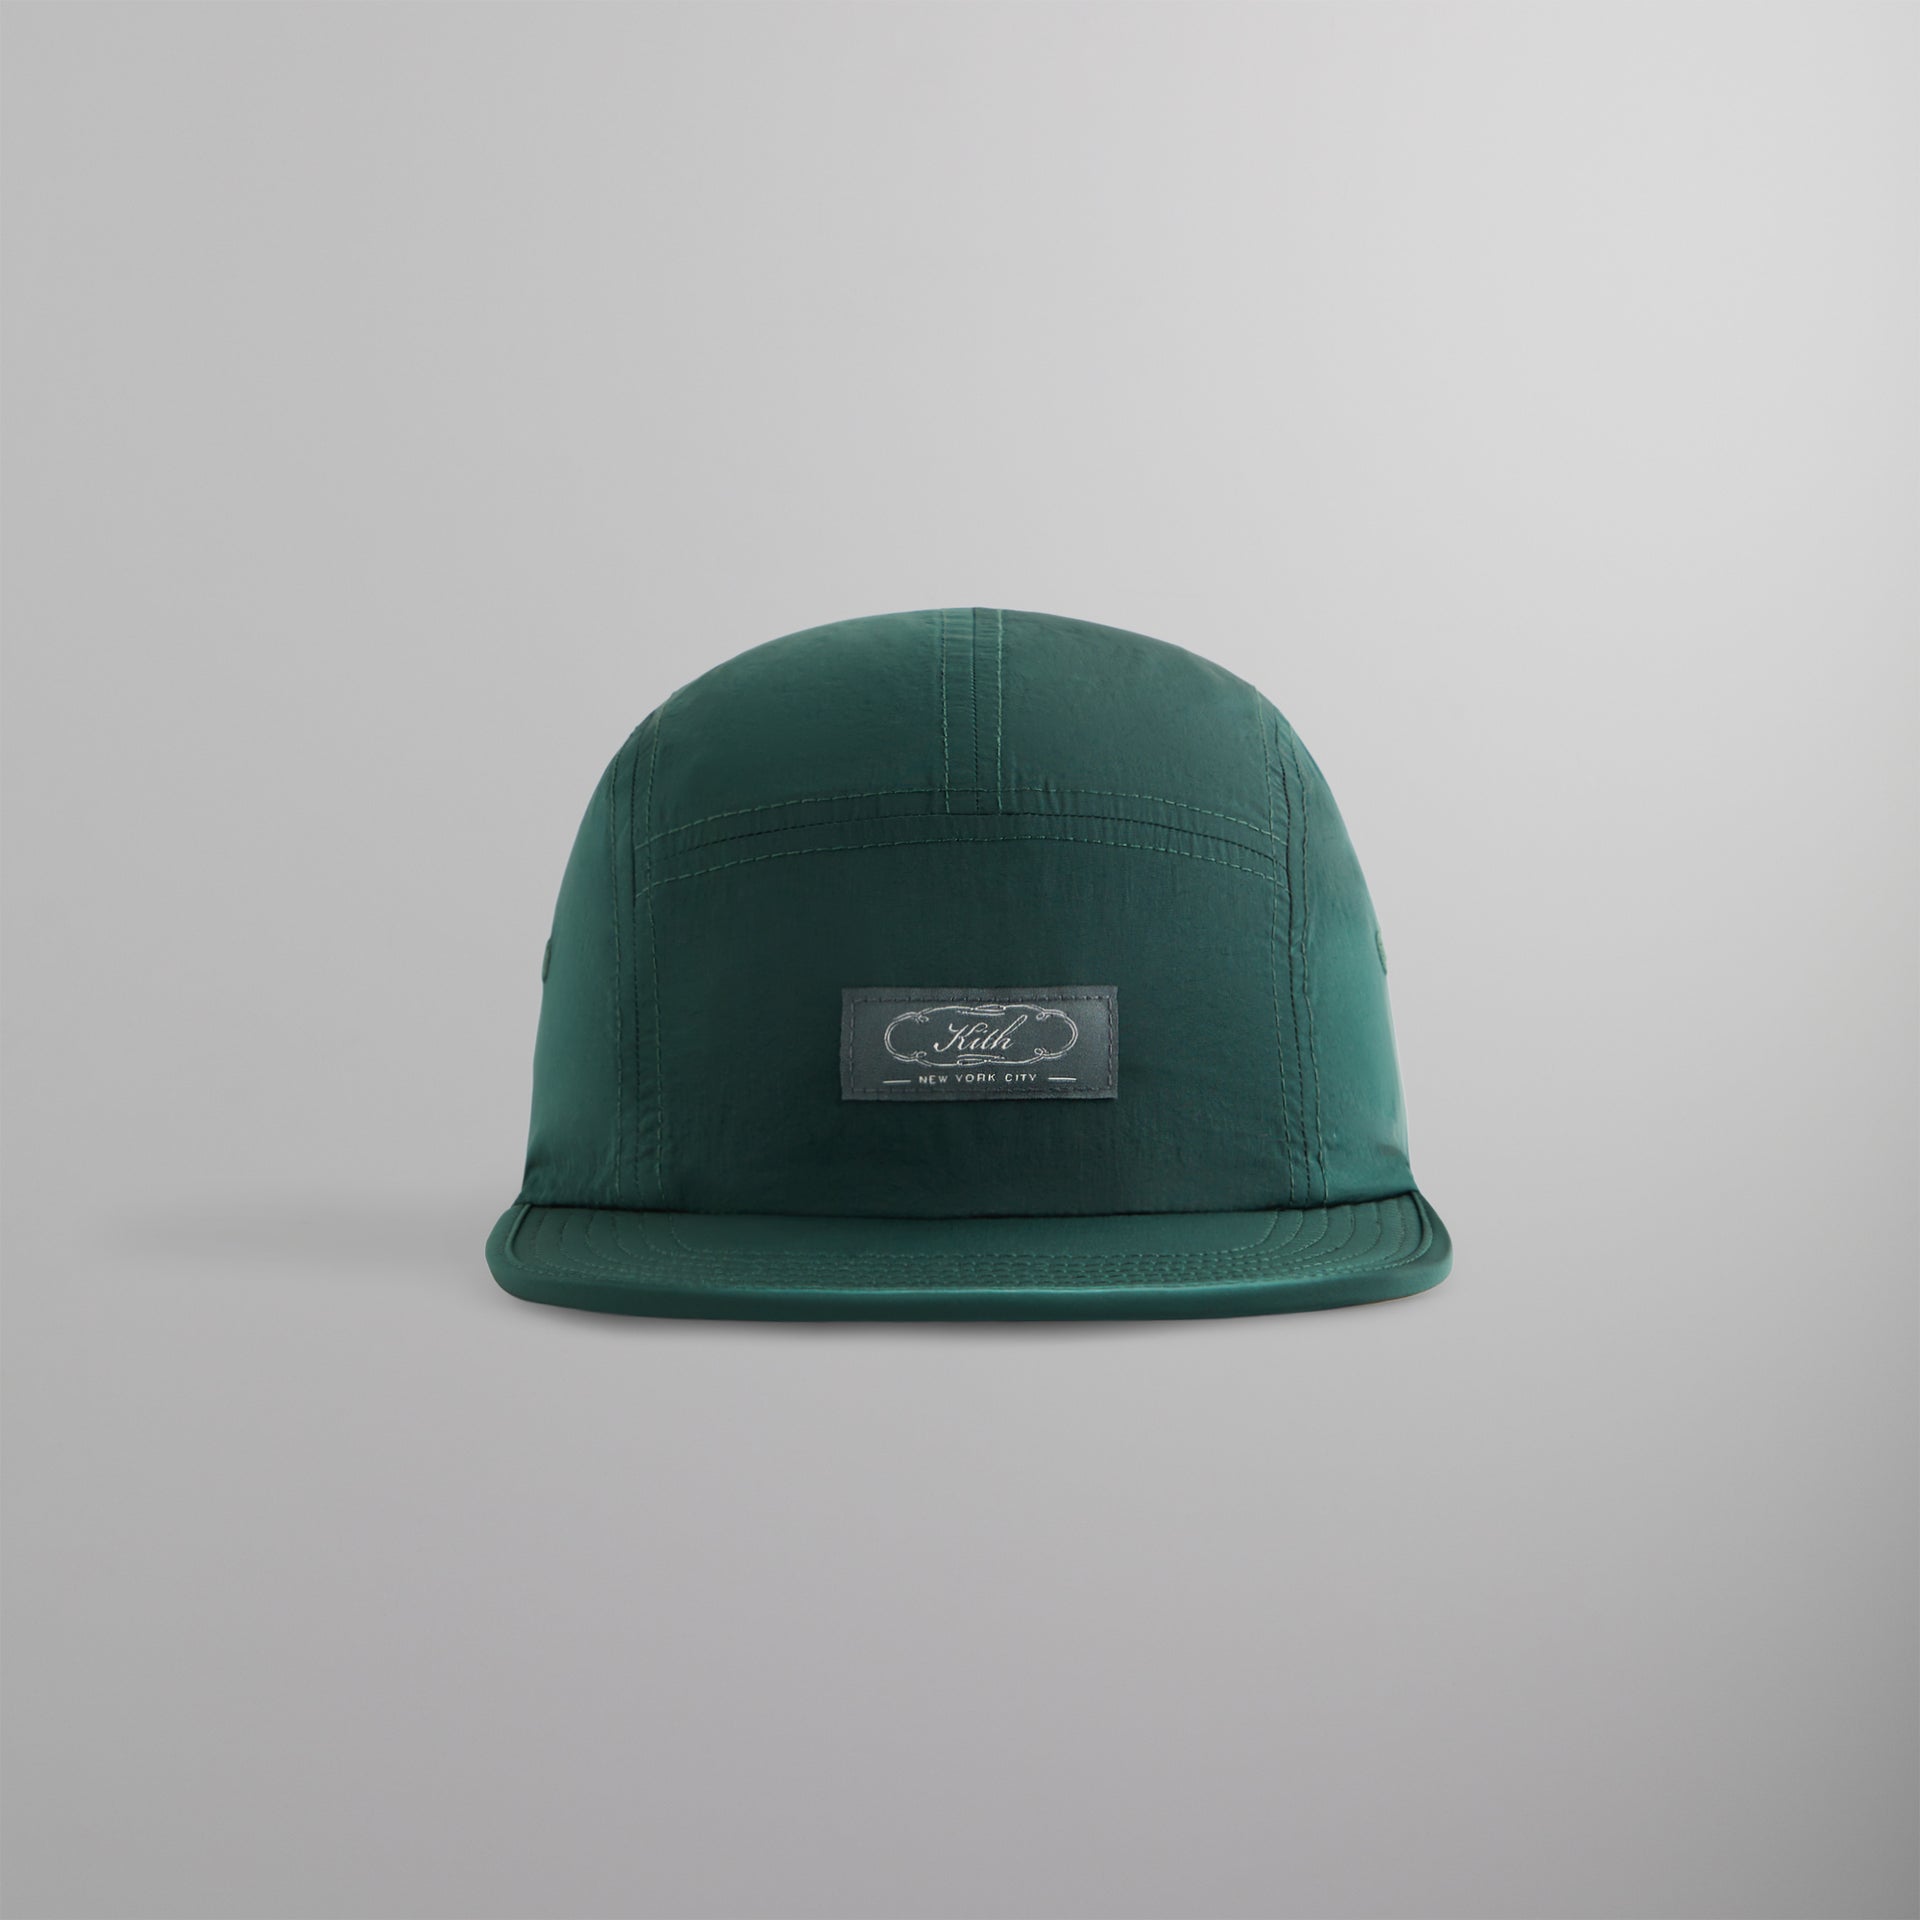 Kith Rose Woven Patch Camper Hat - Stadium